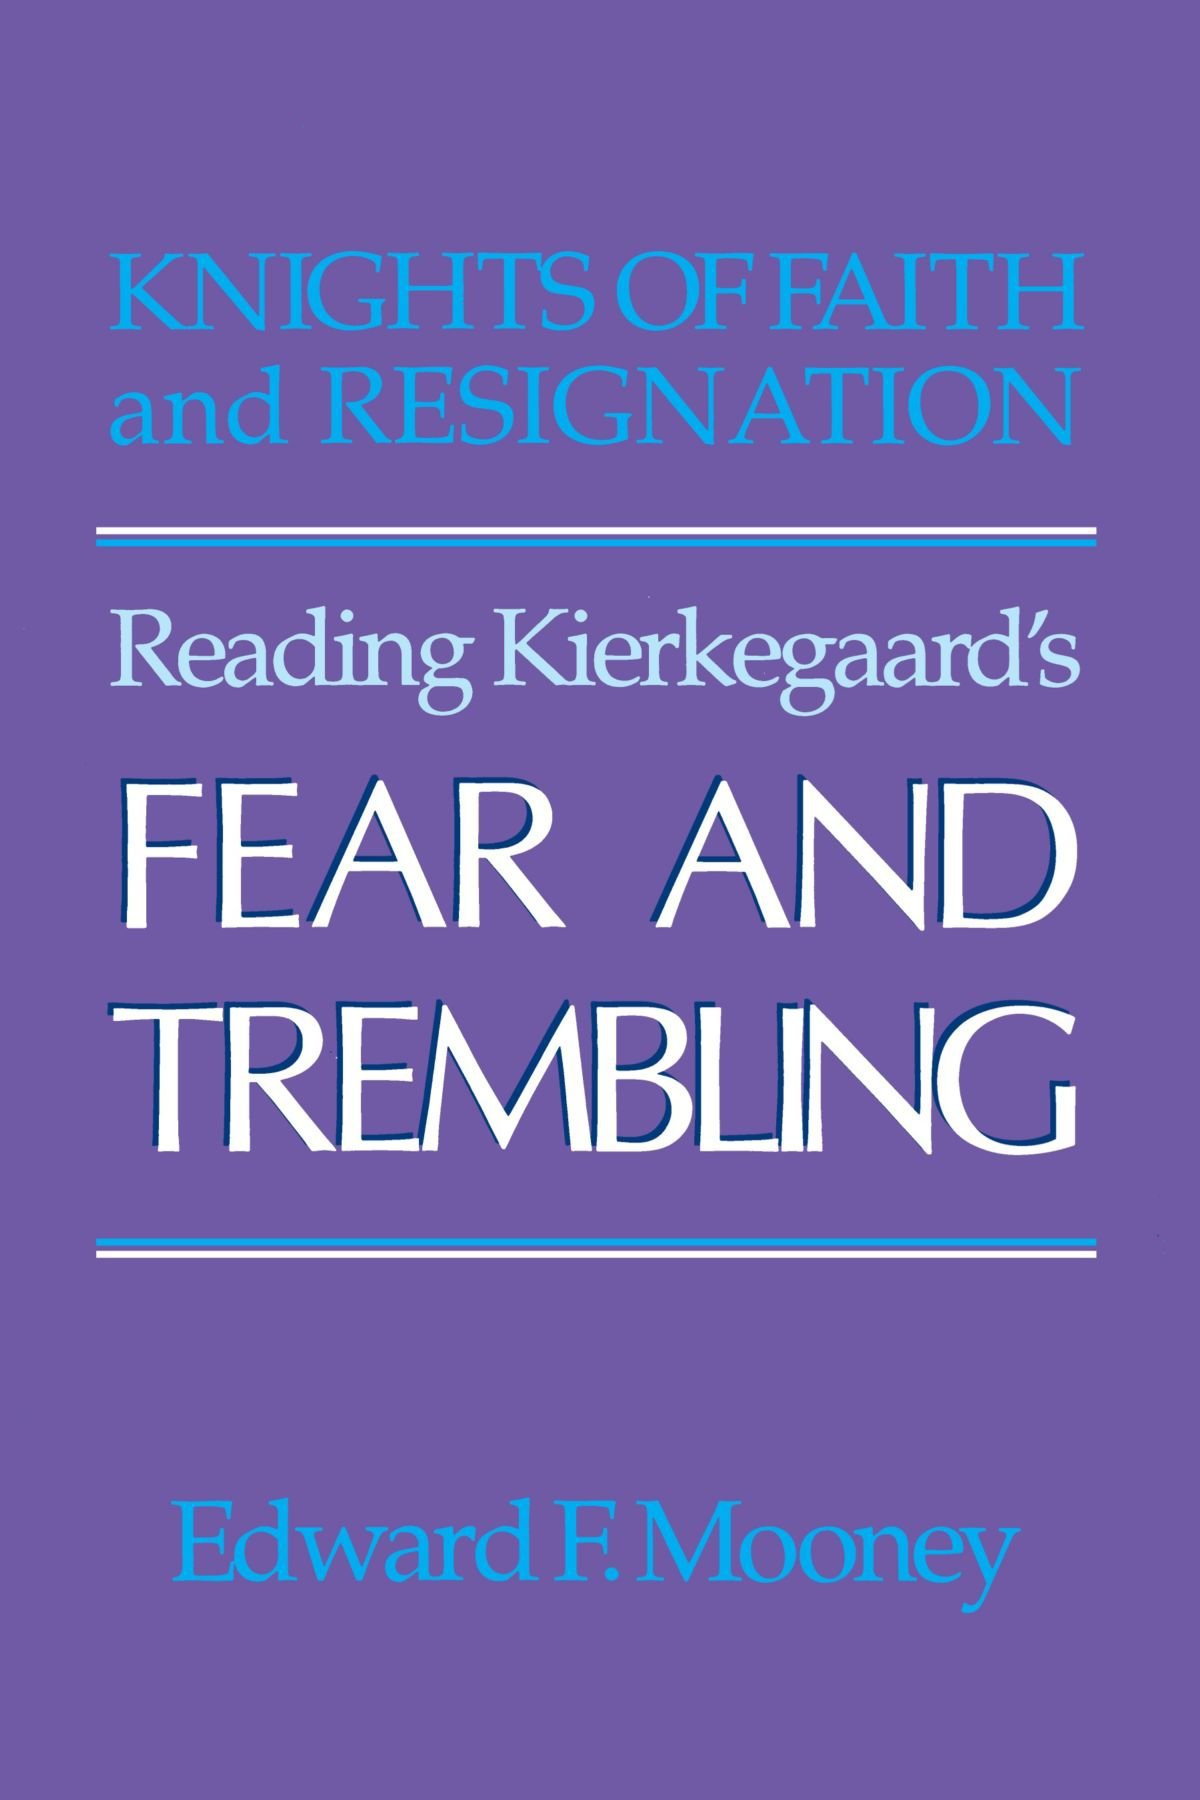 Knights of Faith and Resignation: Reading Kierkegaard's Fear and Trembling